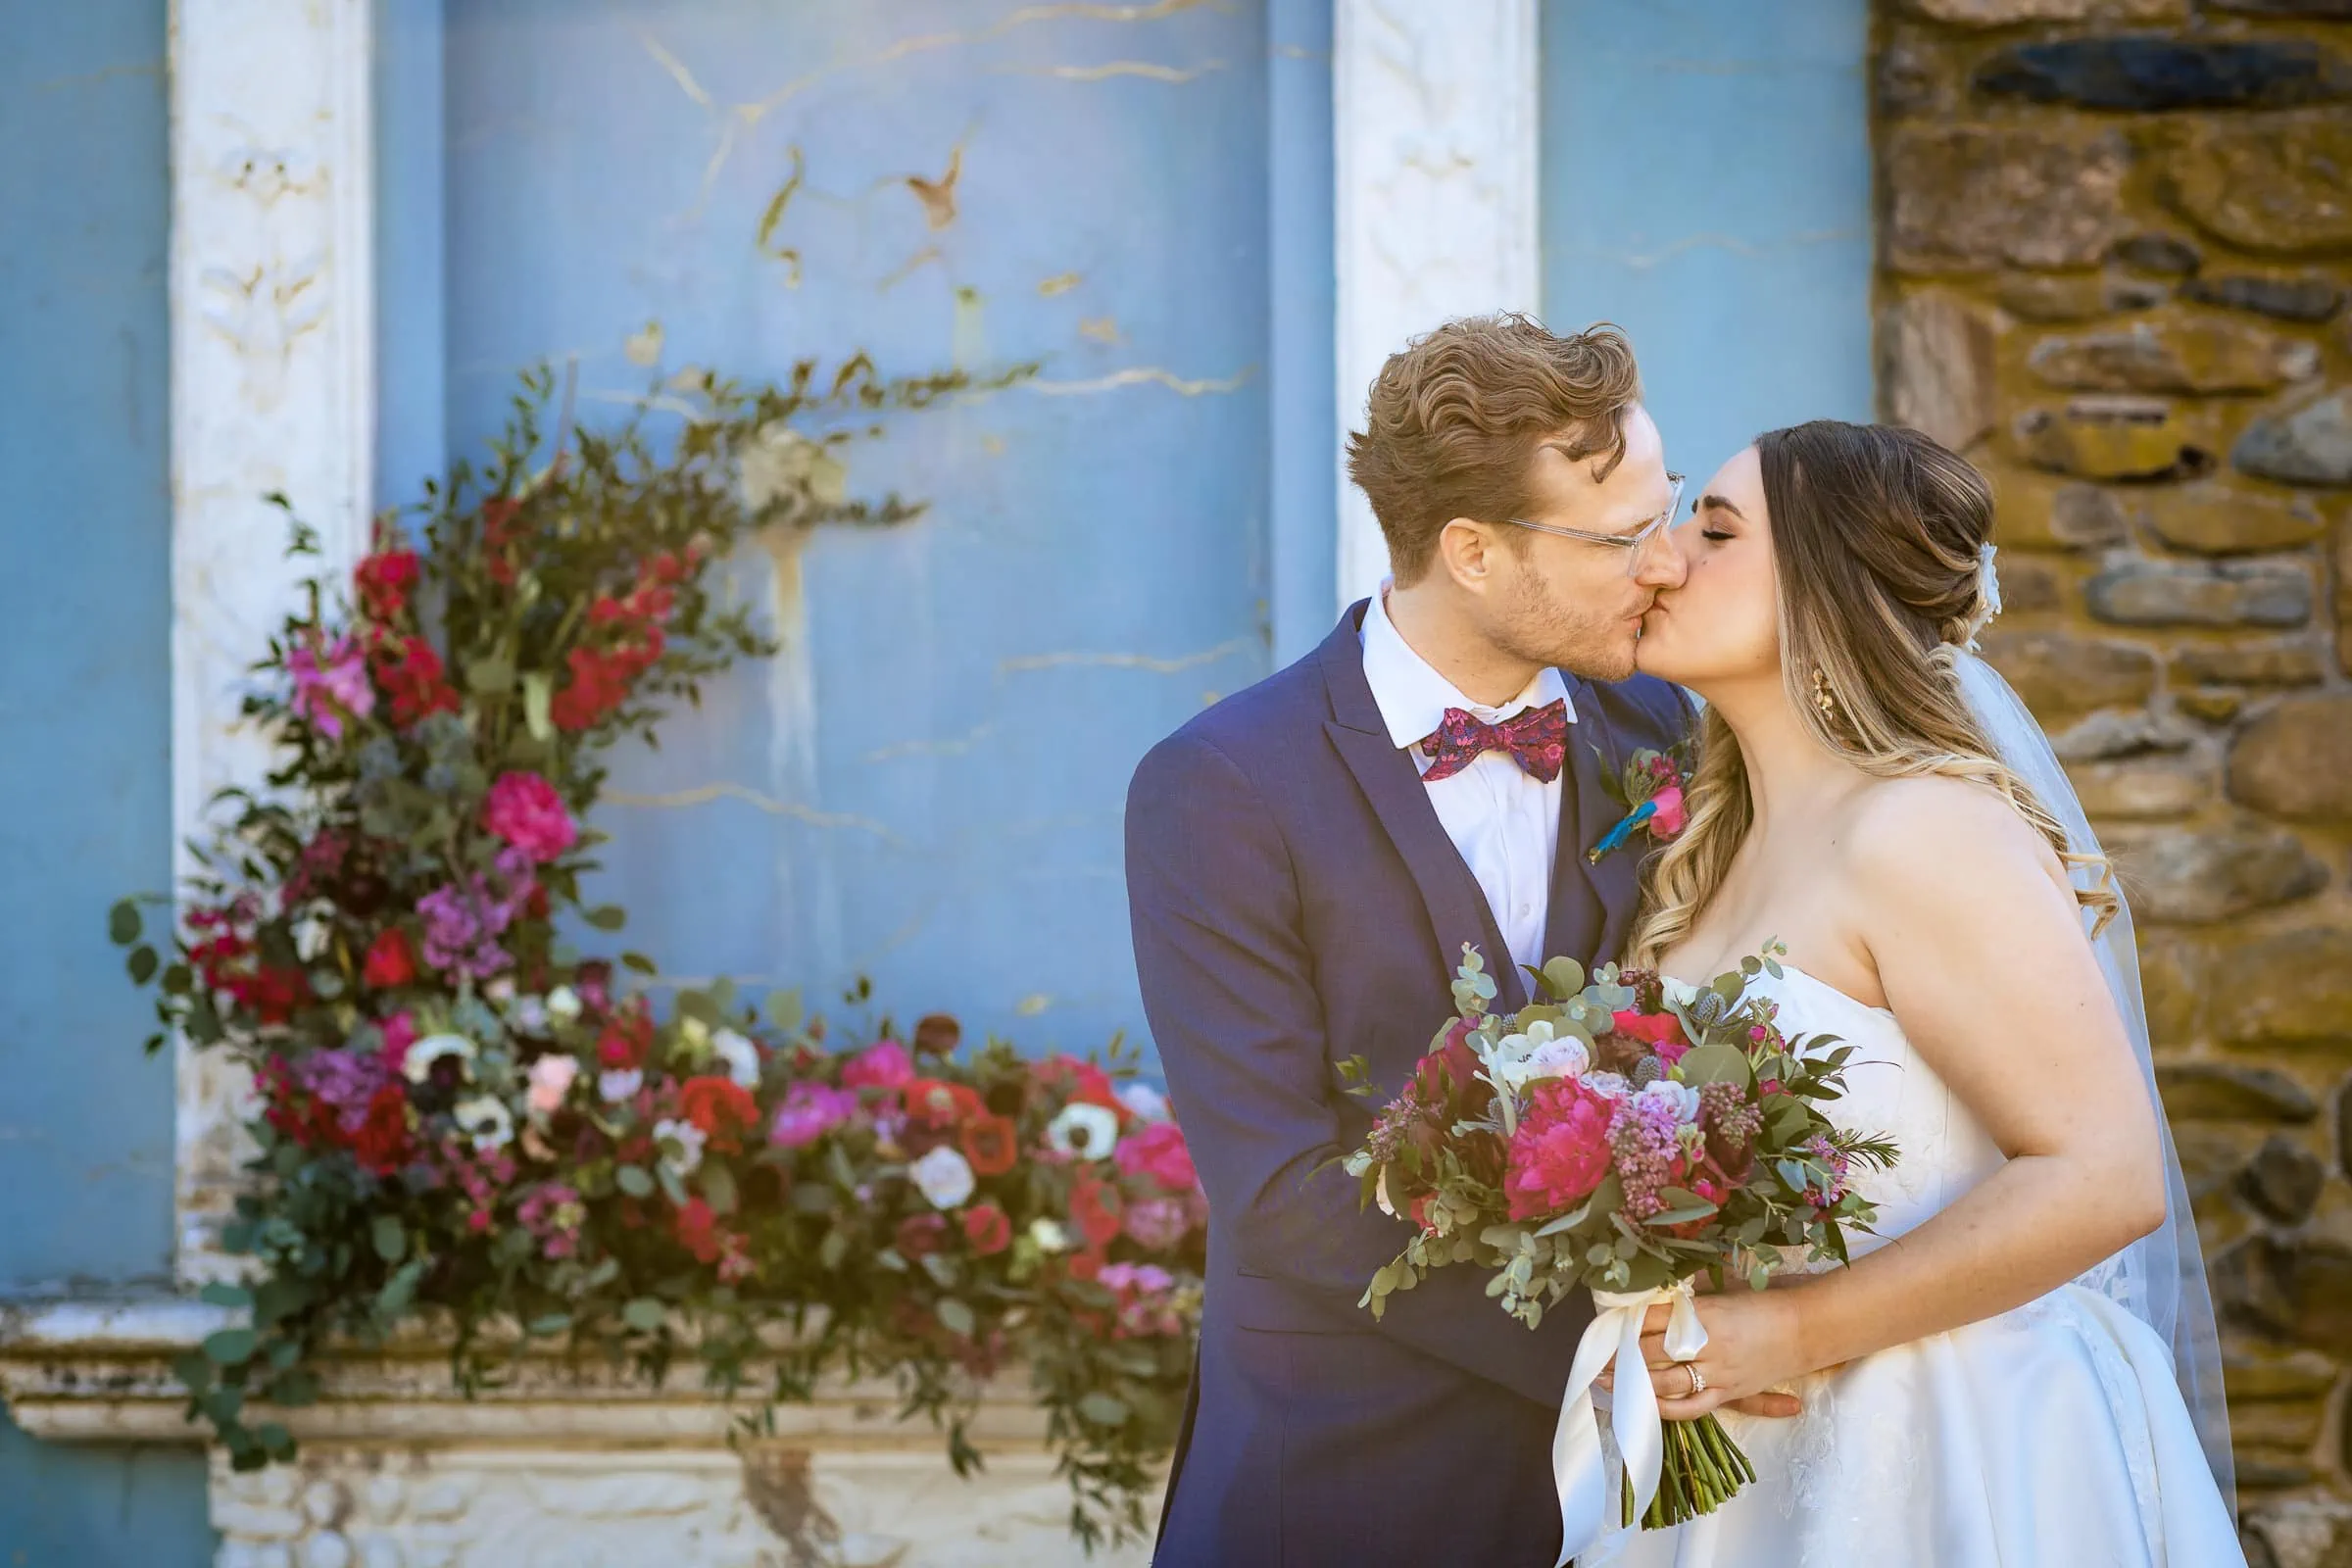 A man in a navy 3 piece suit with pink bowtie kissing a woman in a white dress holding a bouquet of flowers in front of a stone backdrop covered with flowers